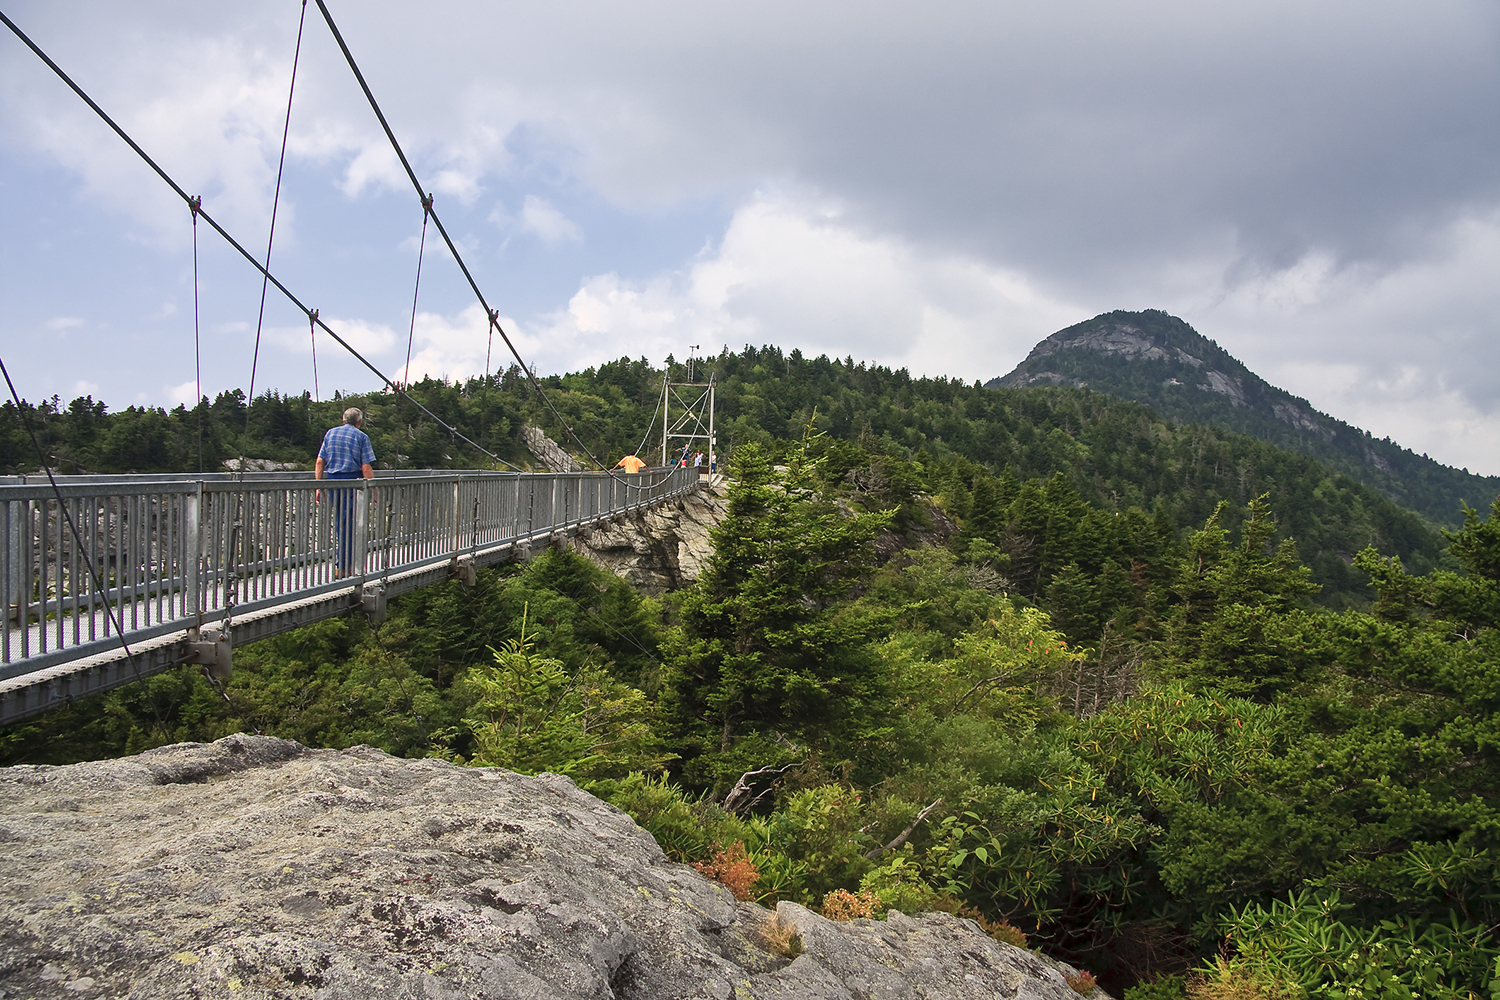 Hikers cross a suspension cable bridge toward a mountain in the distance.